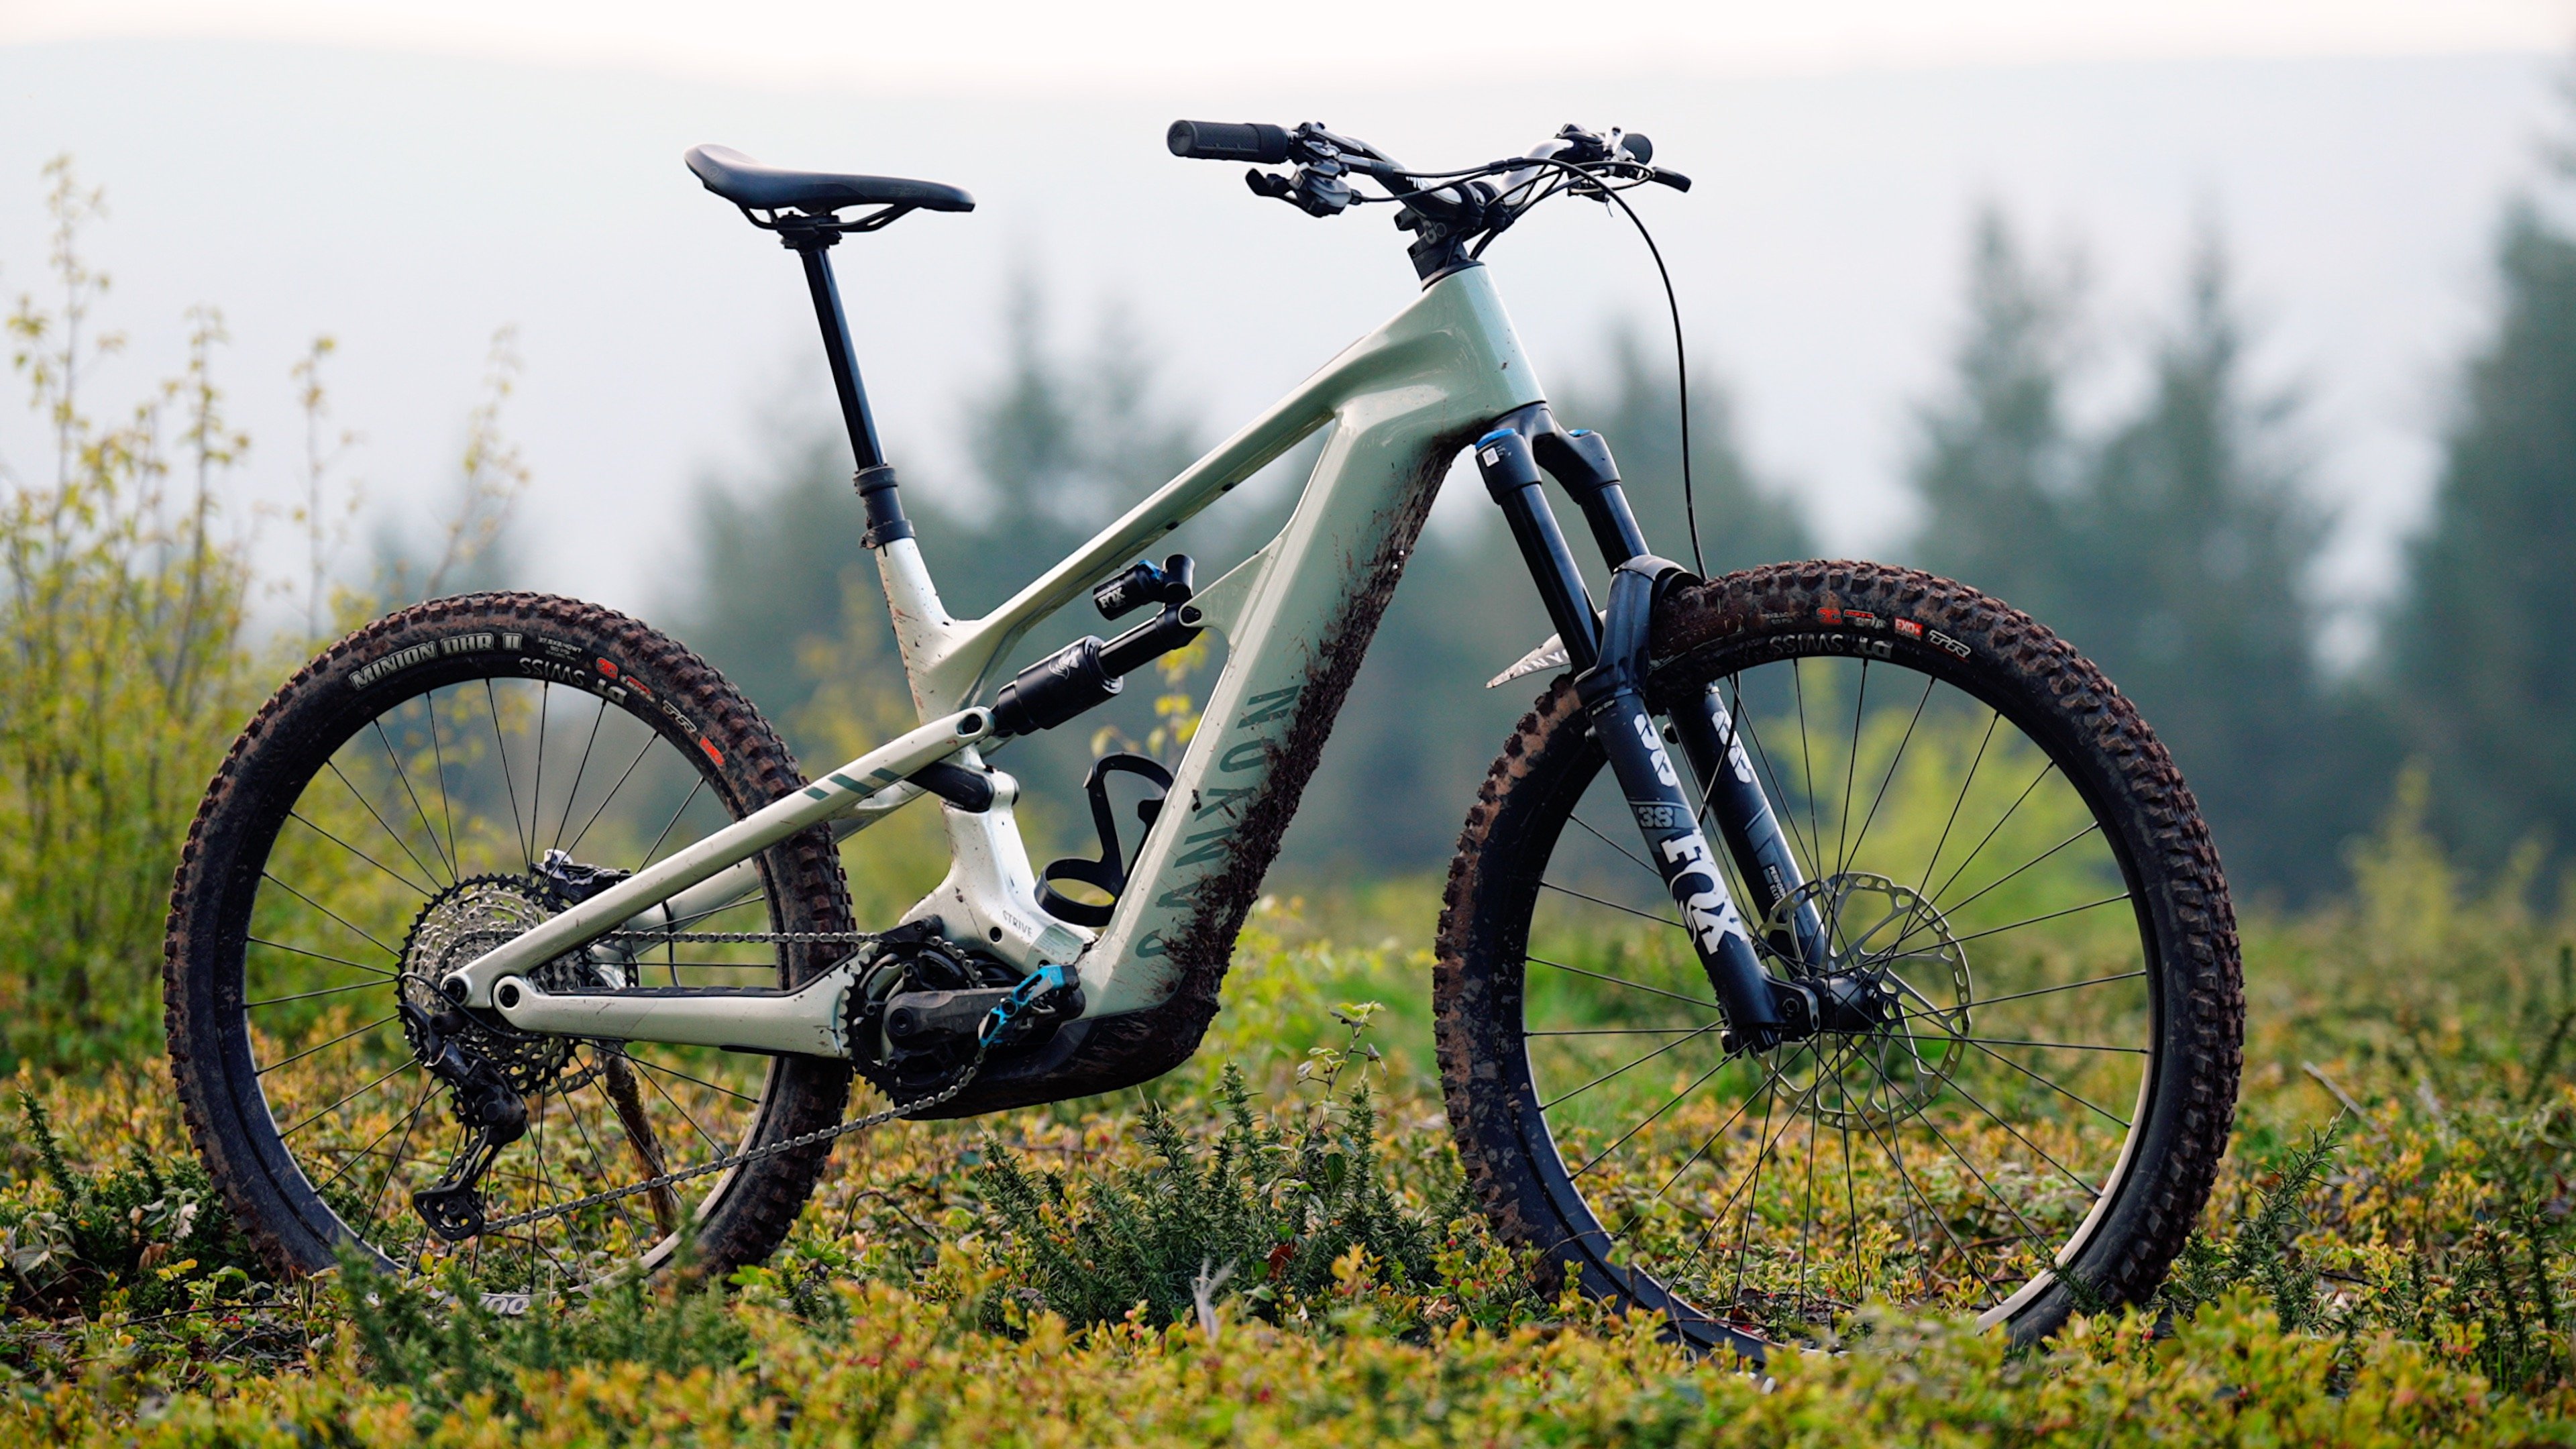 Canyon Strive:ON - An aggressive, enduro EMTB with outstanding performance